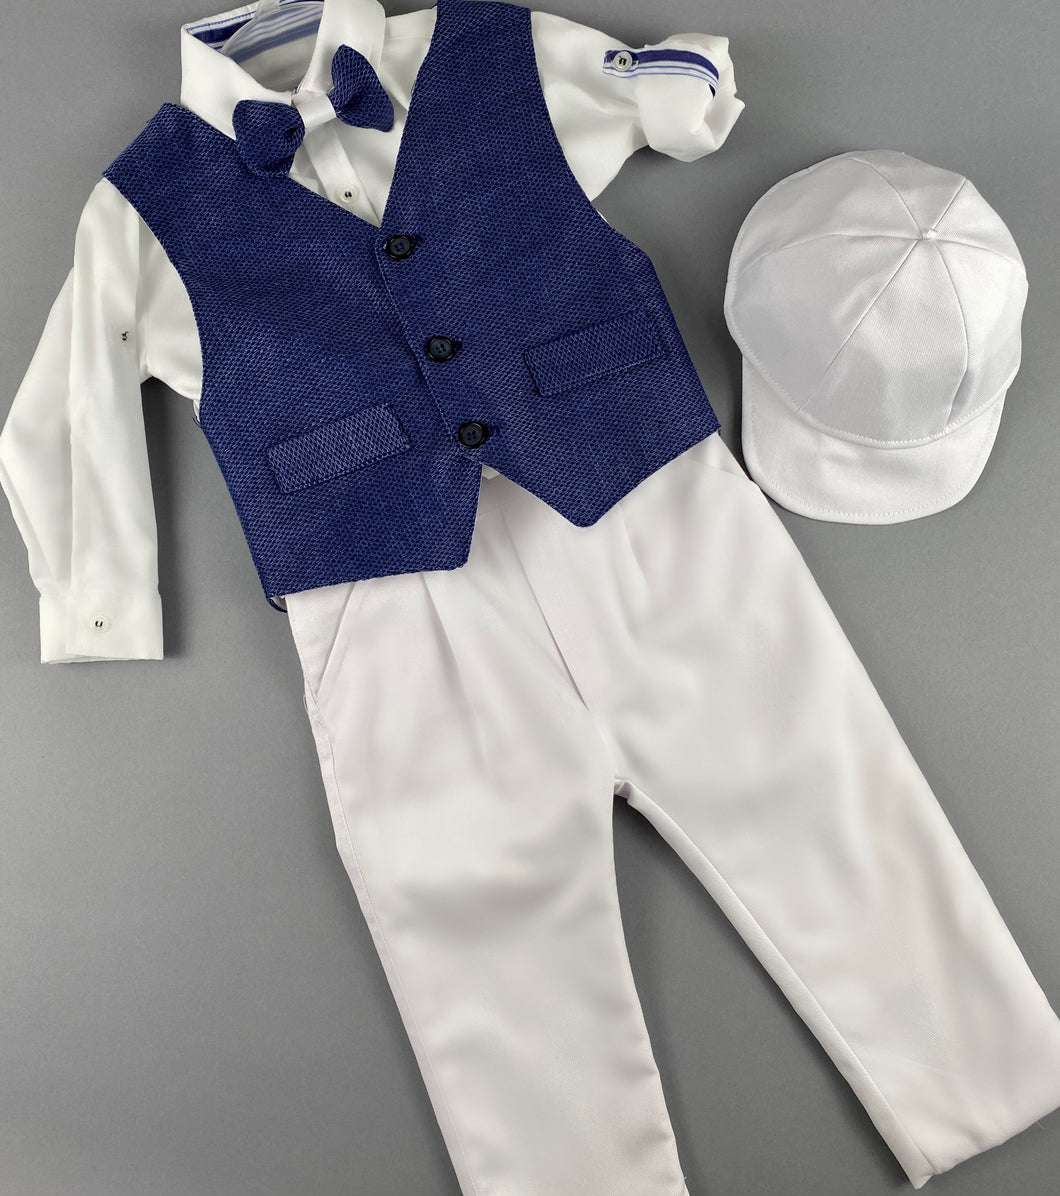 Rosies Collections 7pc full suit, Dress shirt with cuff sleeves, Bow Tie, Pants, Jacket with Matching Vest,  Belt or Suspenders & Cap. Made in Greece exclusively for Rosies Collections S201927